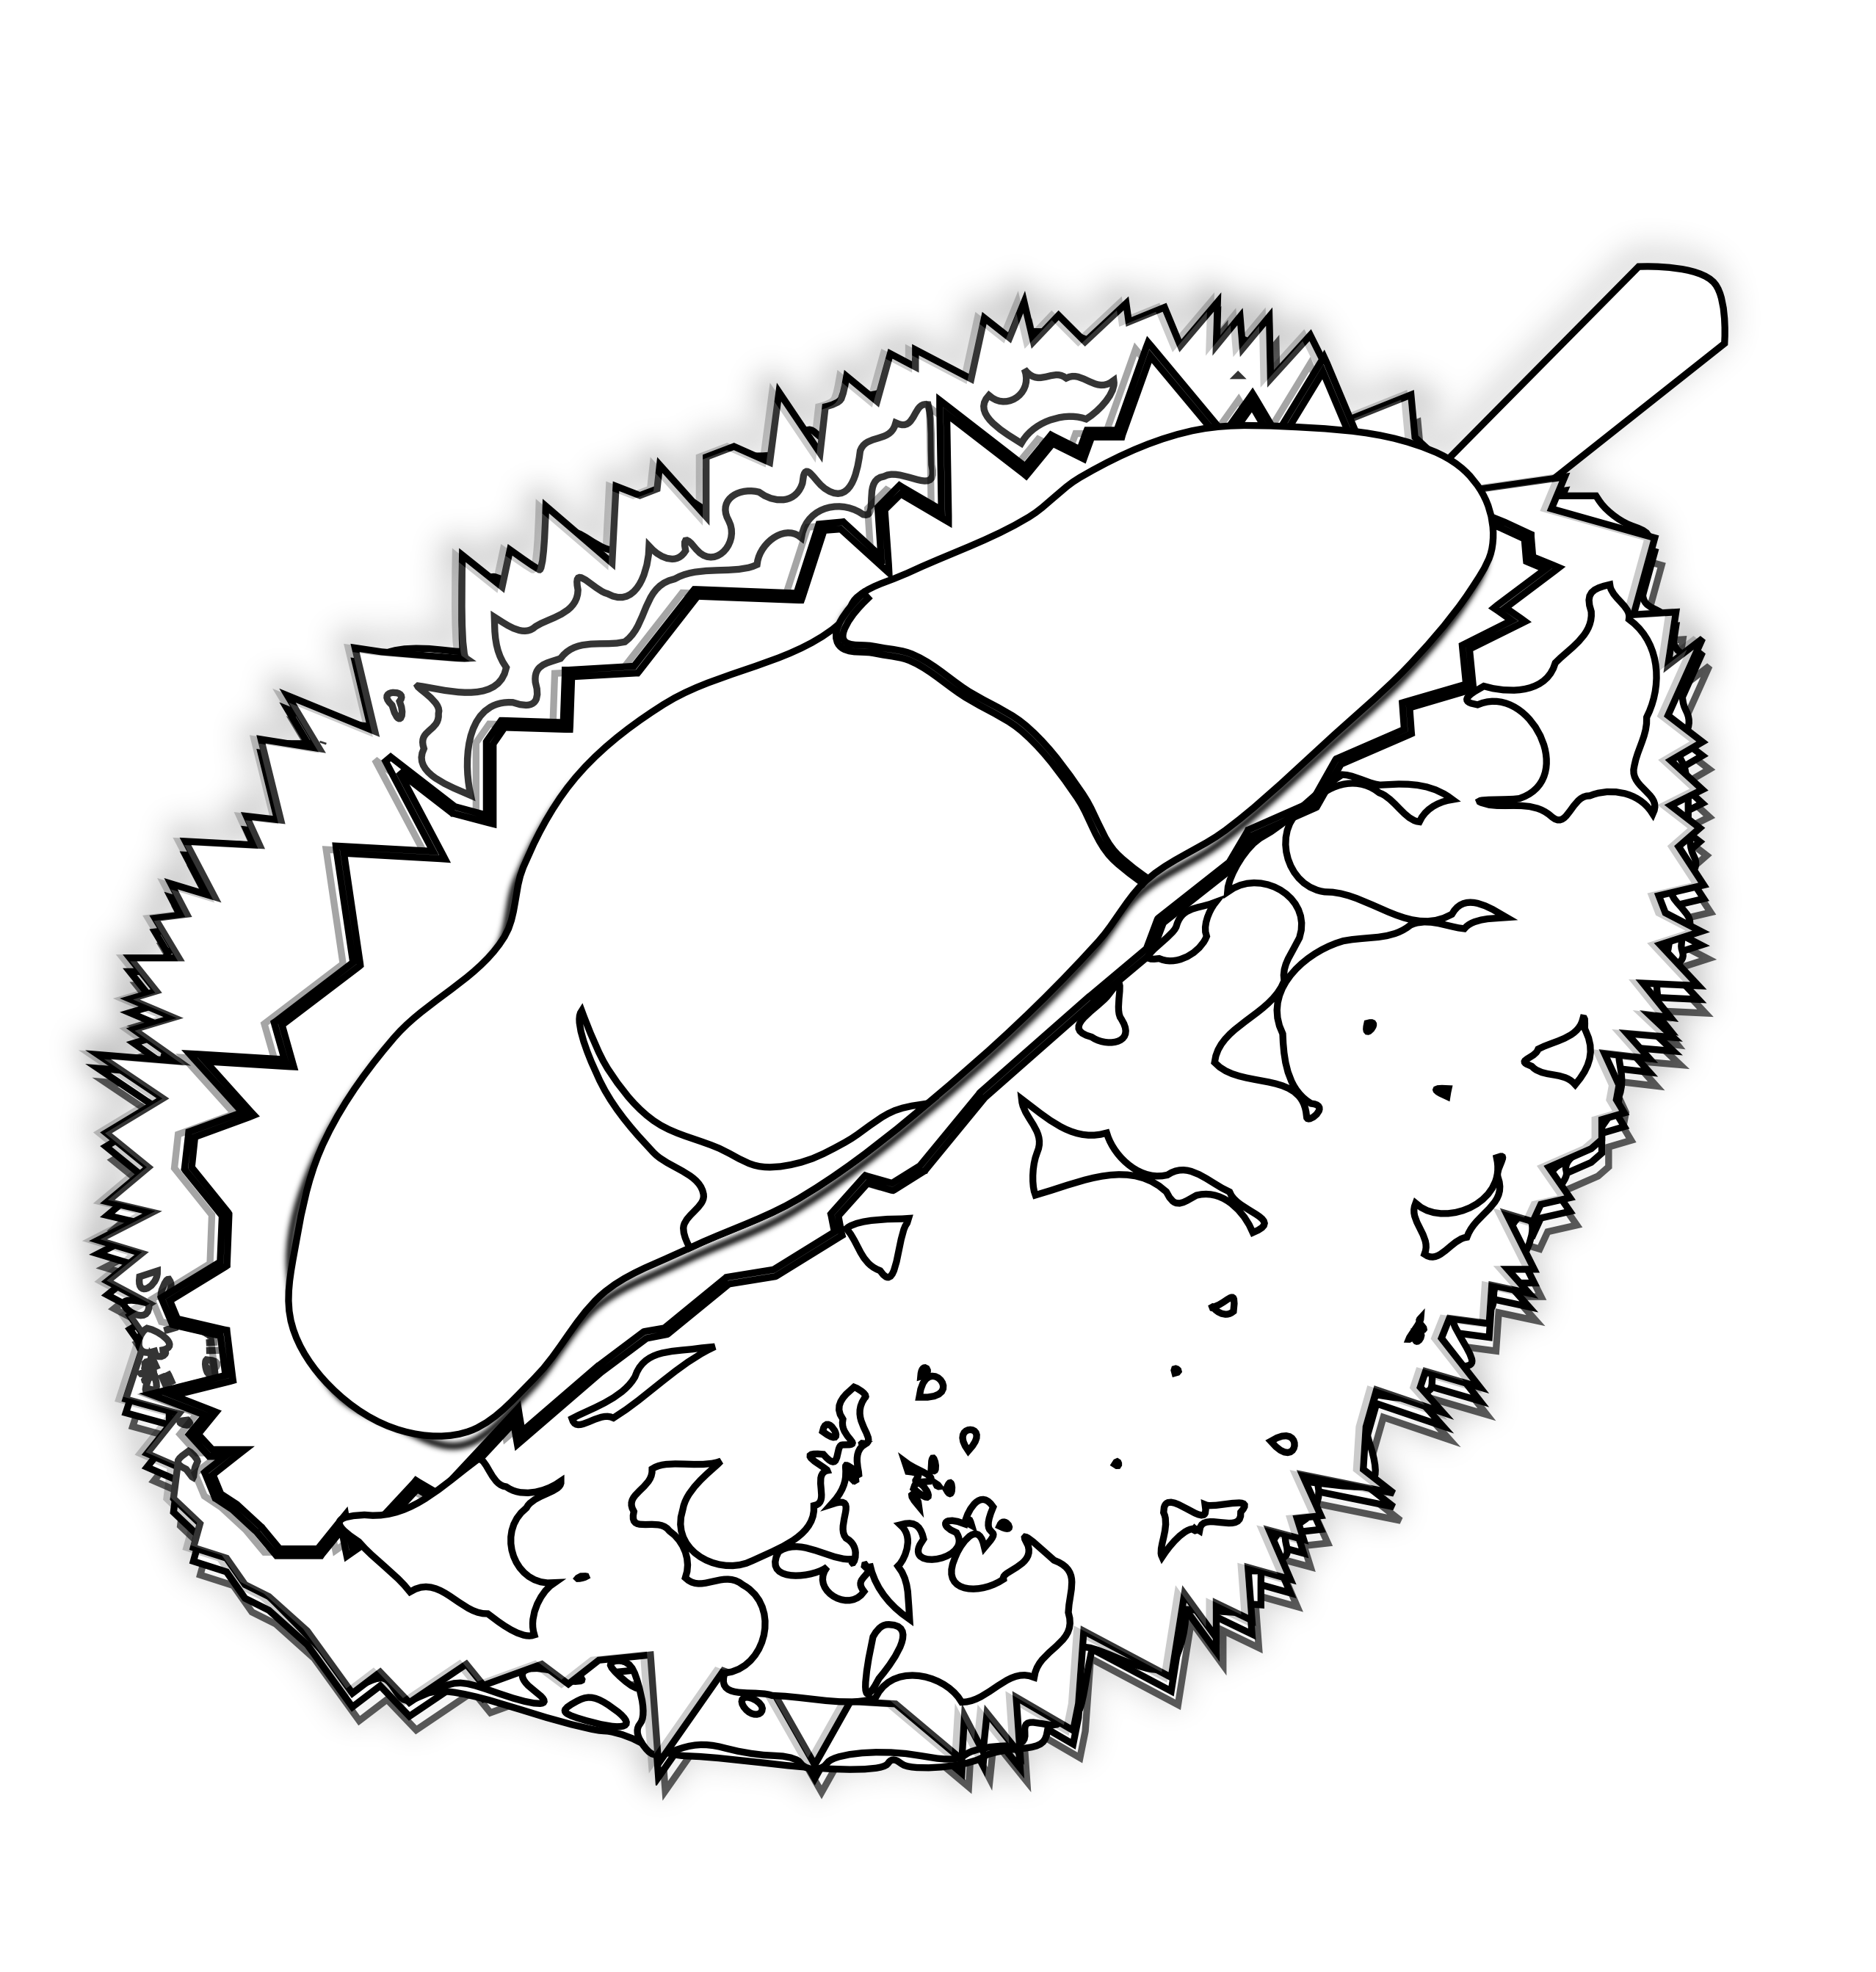 food durian durian black white line art scalable vector graphics ...